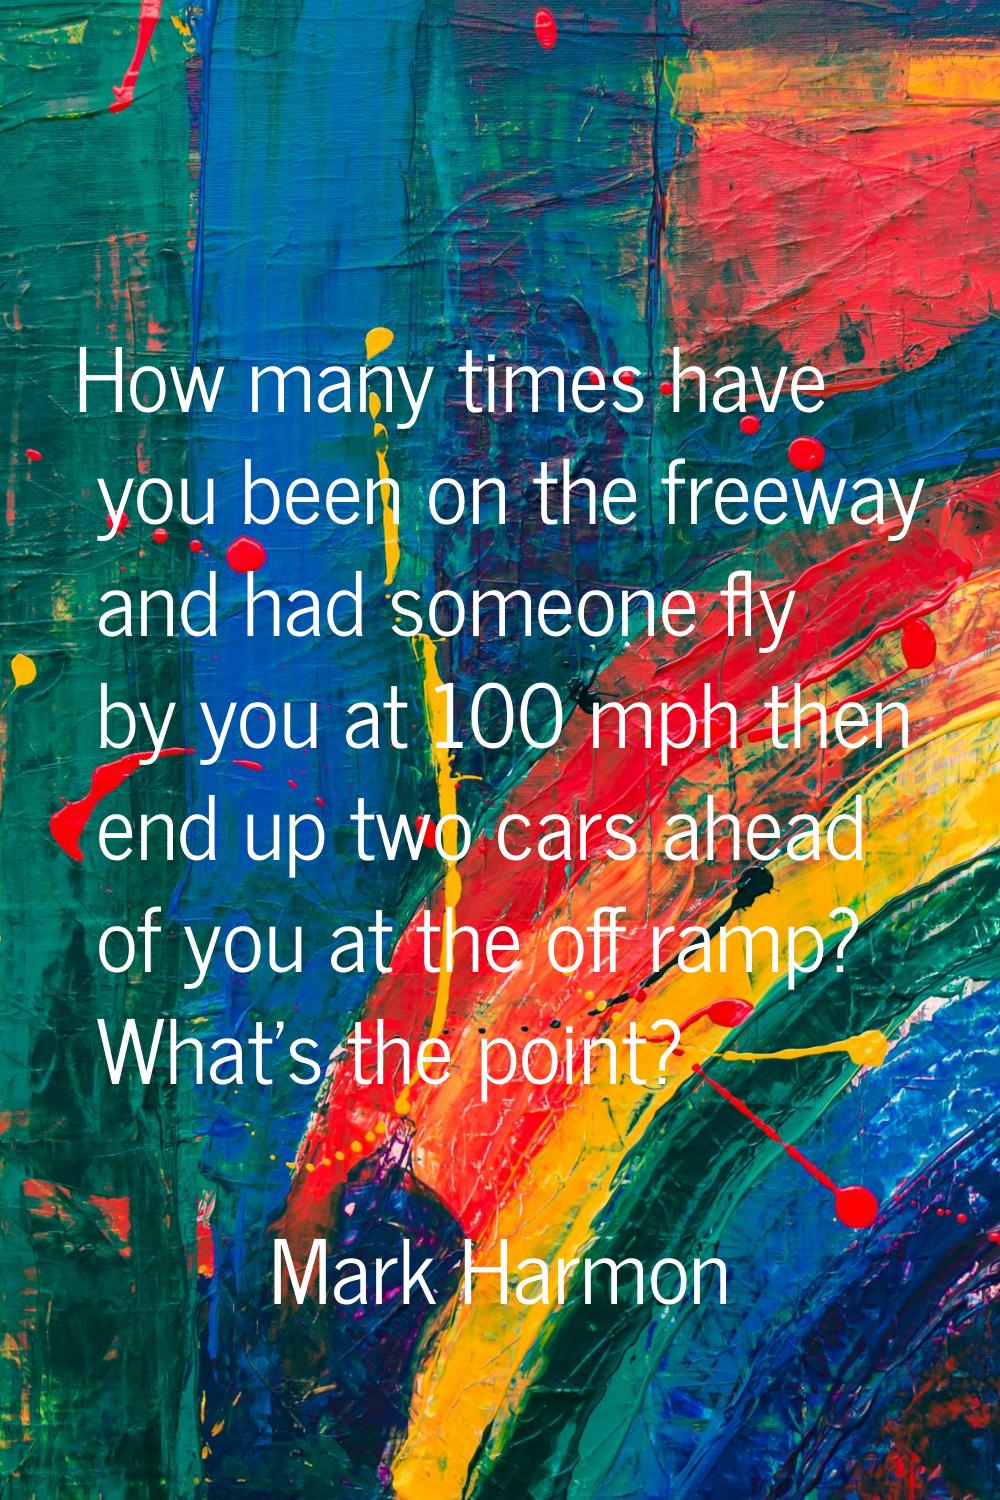 How many times have you been on the freeway and had someone fly by you at 100 mph then end up two c